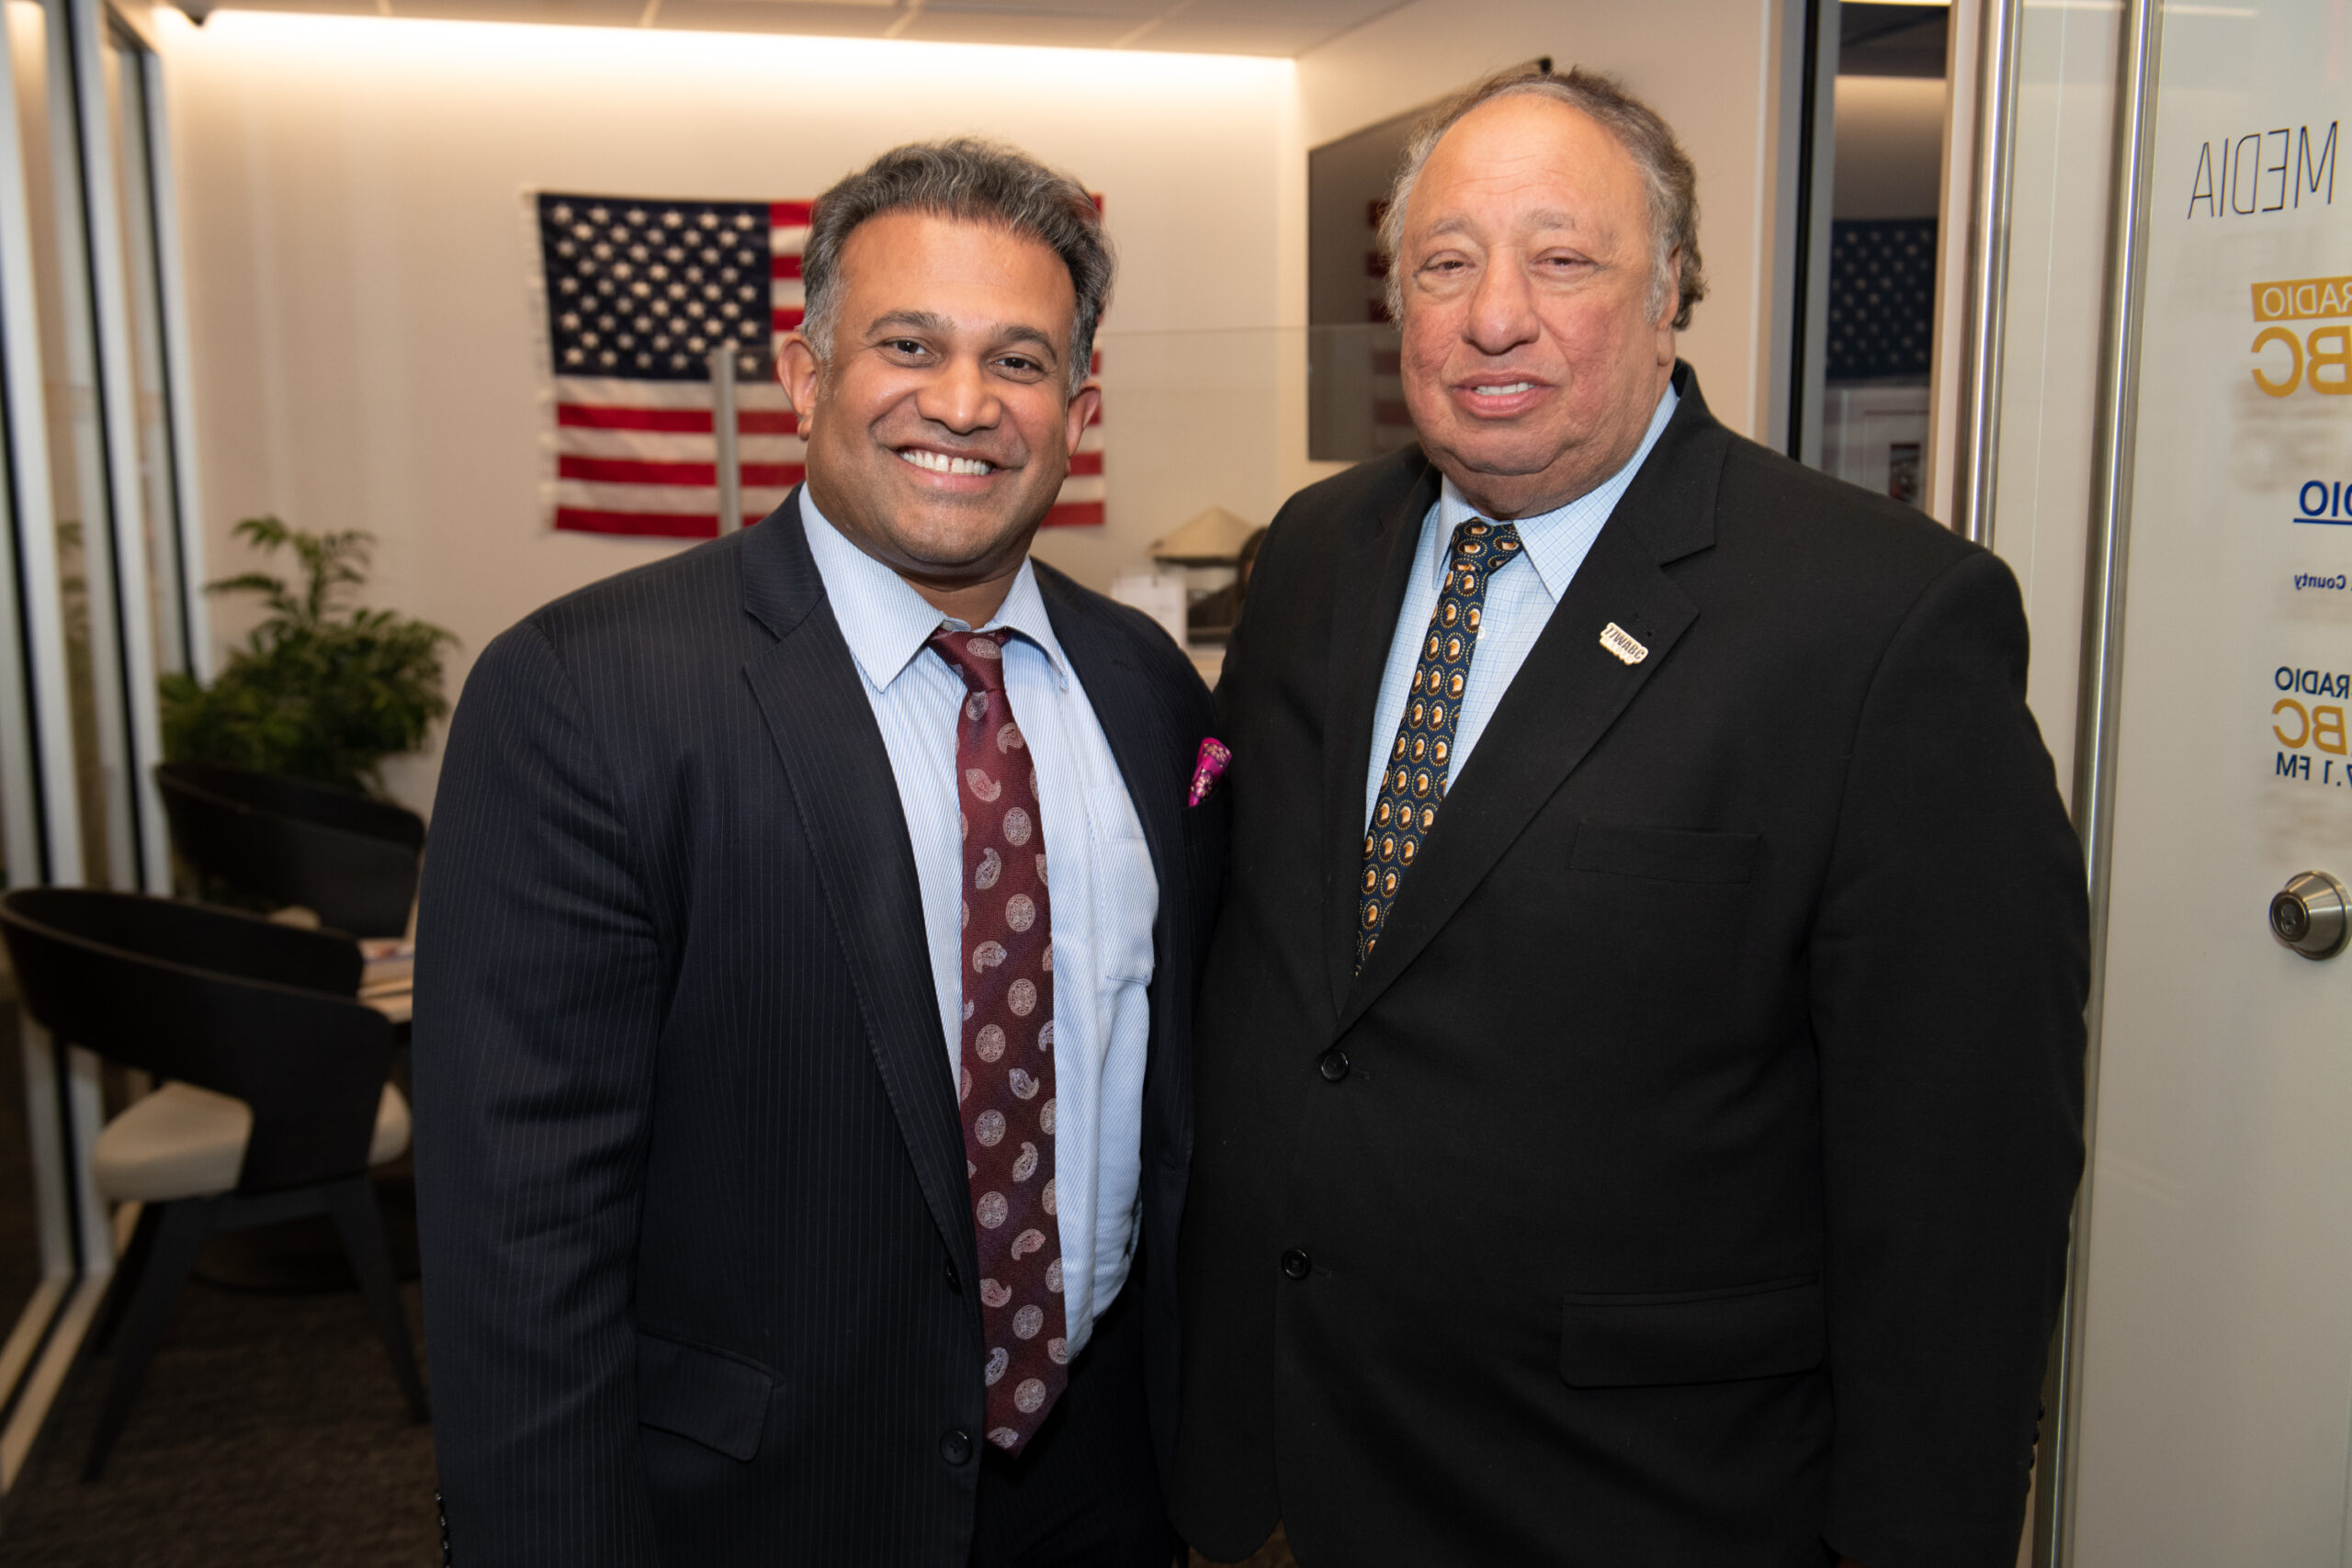 Vinoo with John Catsimatidis — the owner of 77 WABC, Gristedes Supermarkets, and former mayoral candidate